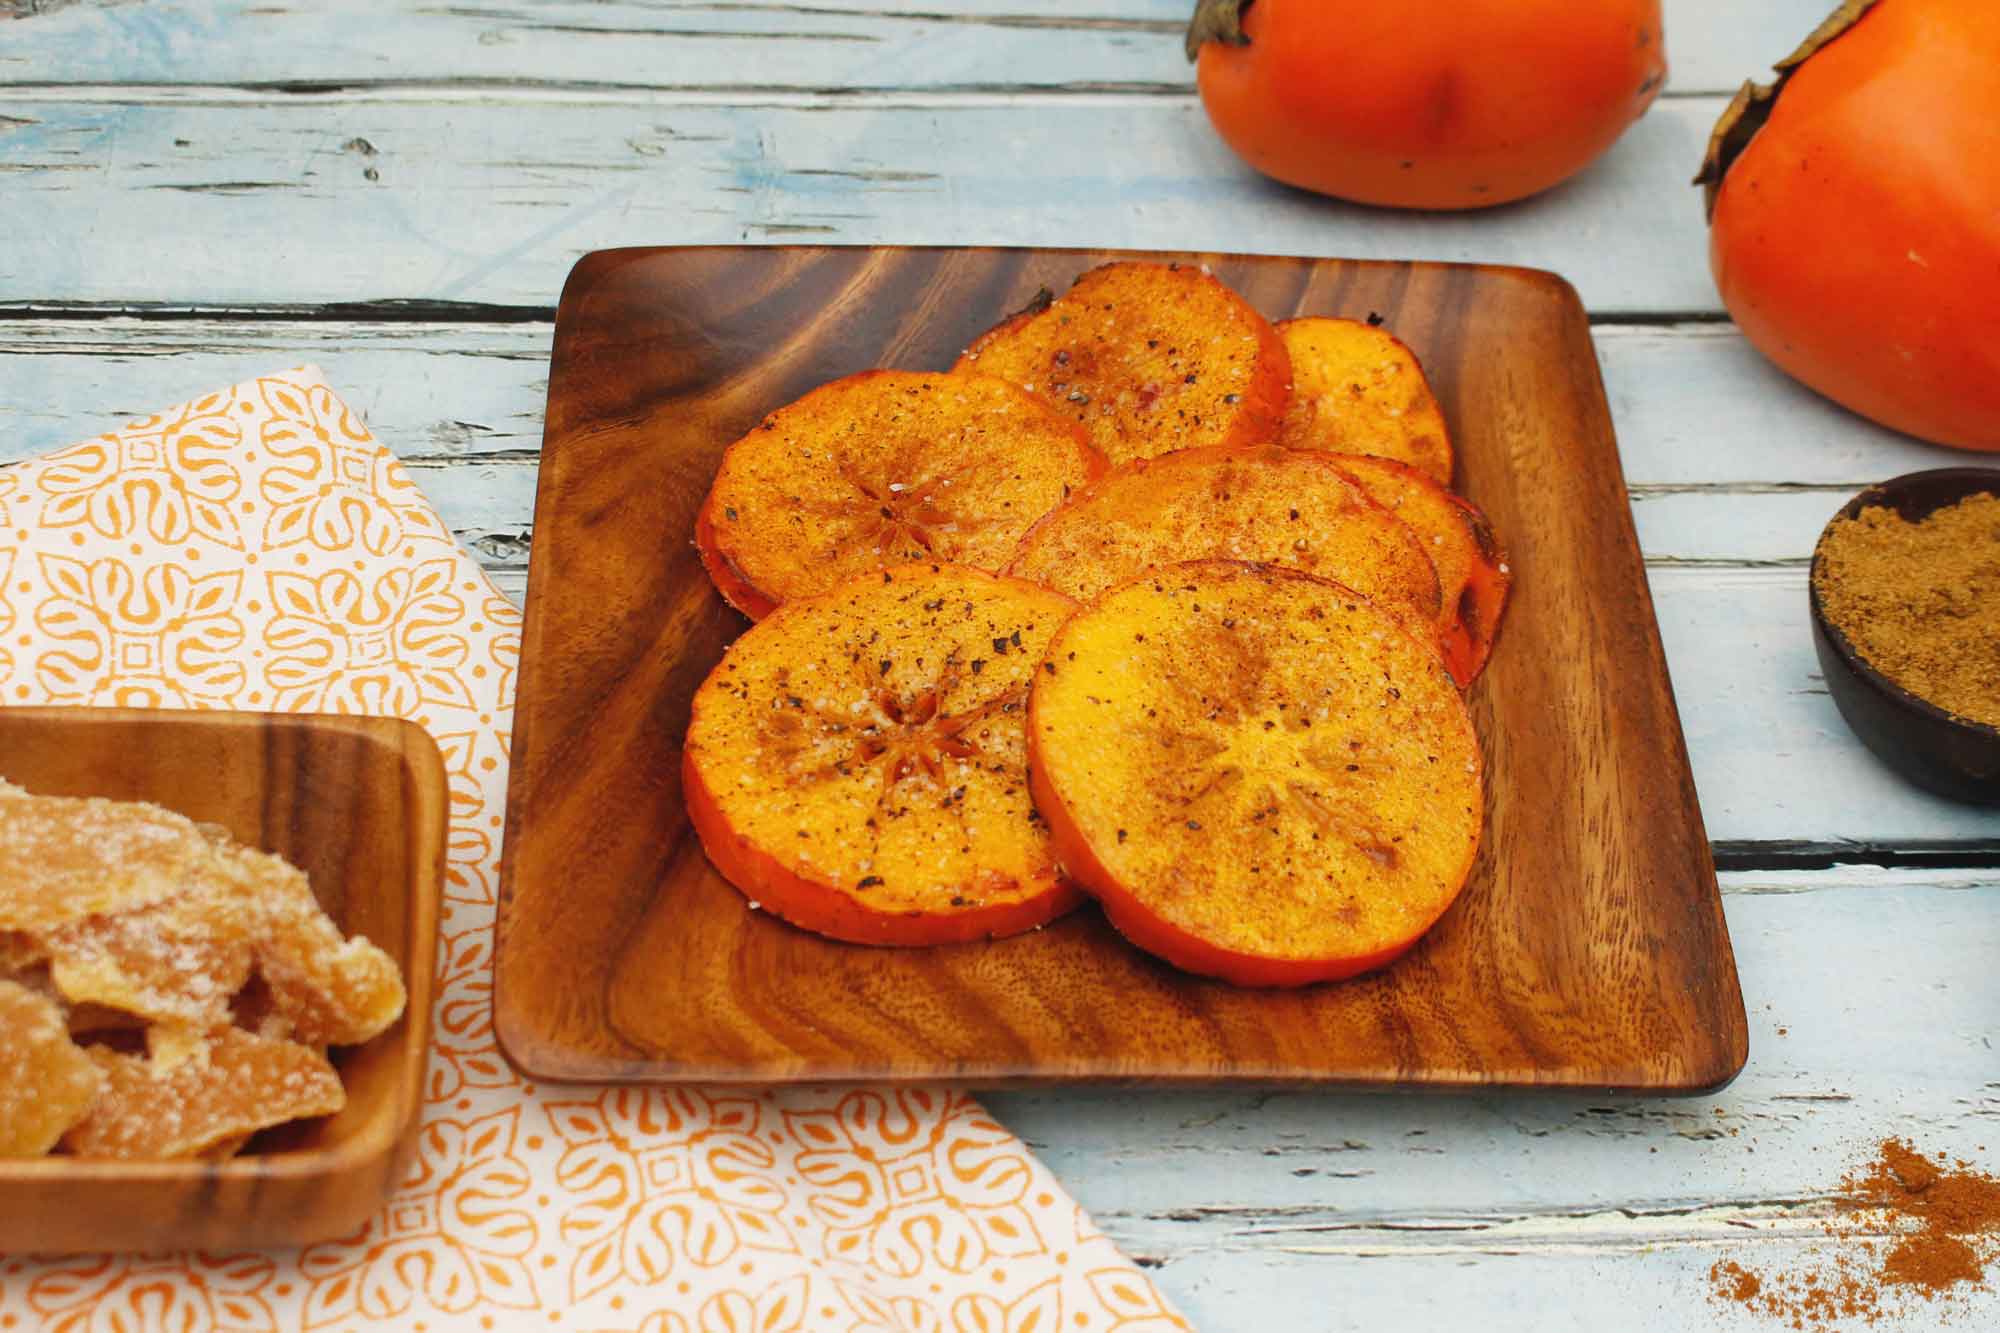 Persimmon with Cinnamon